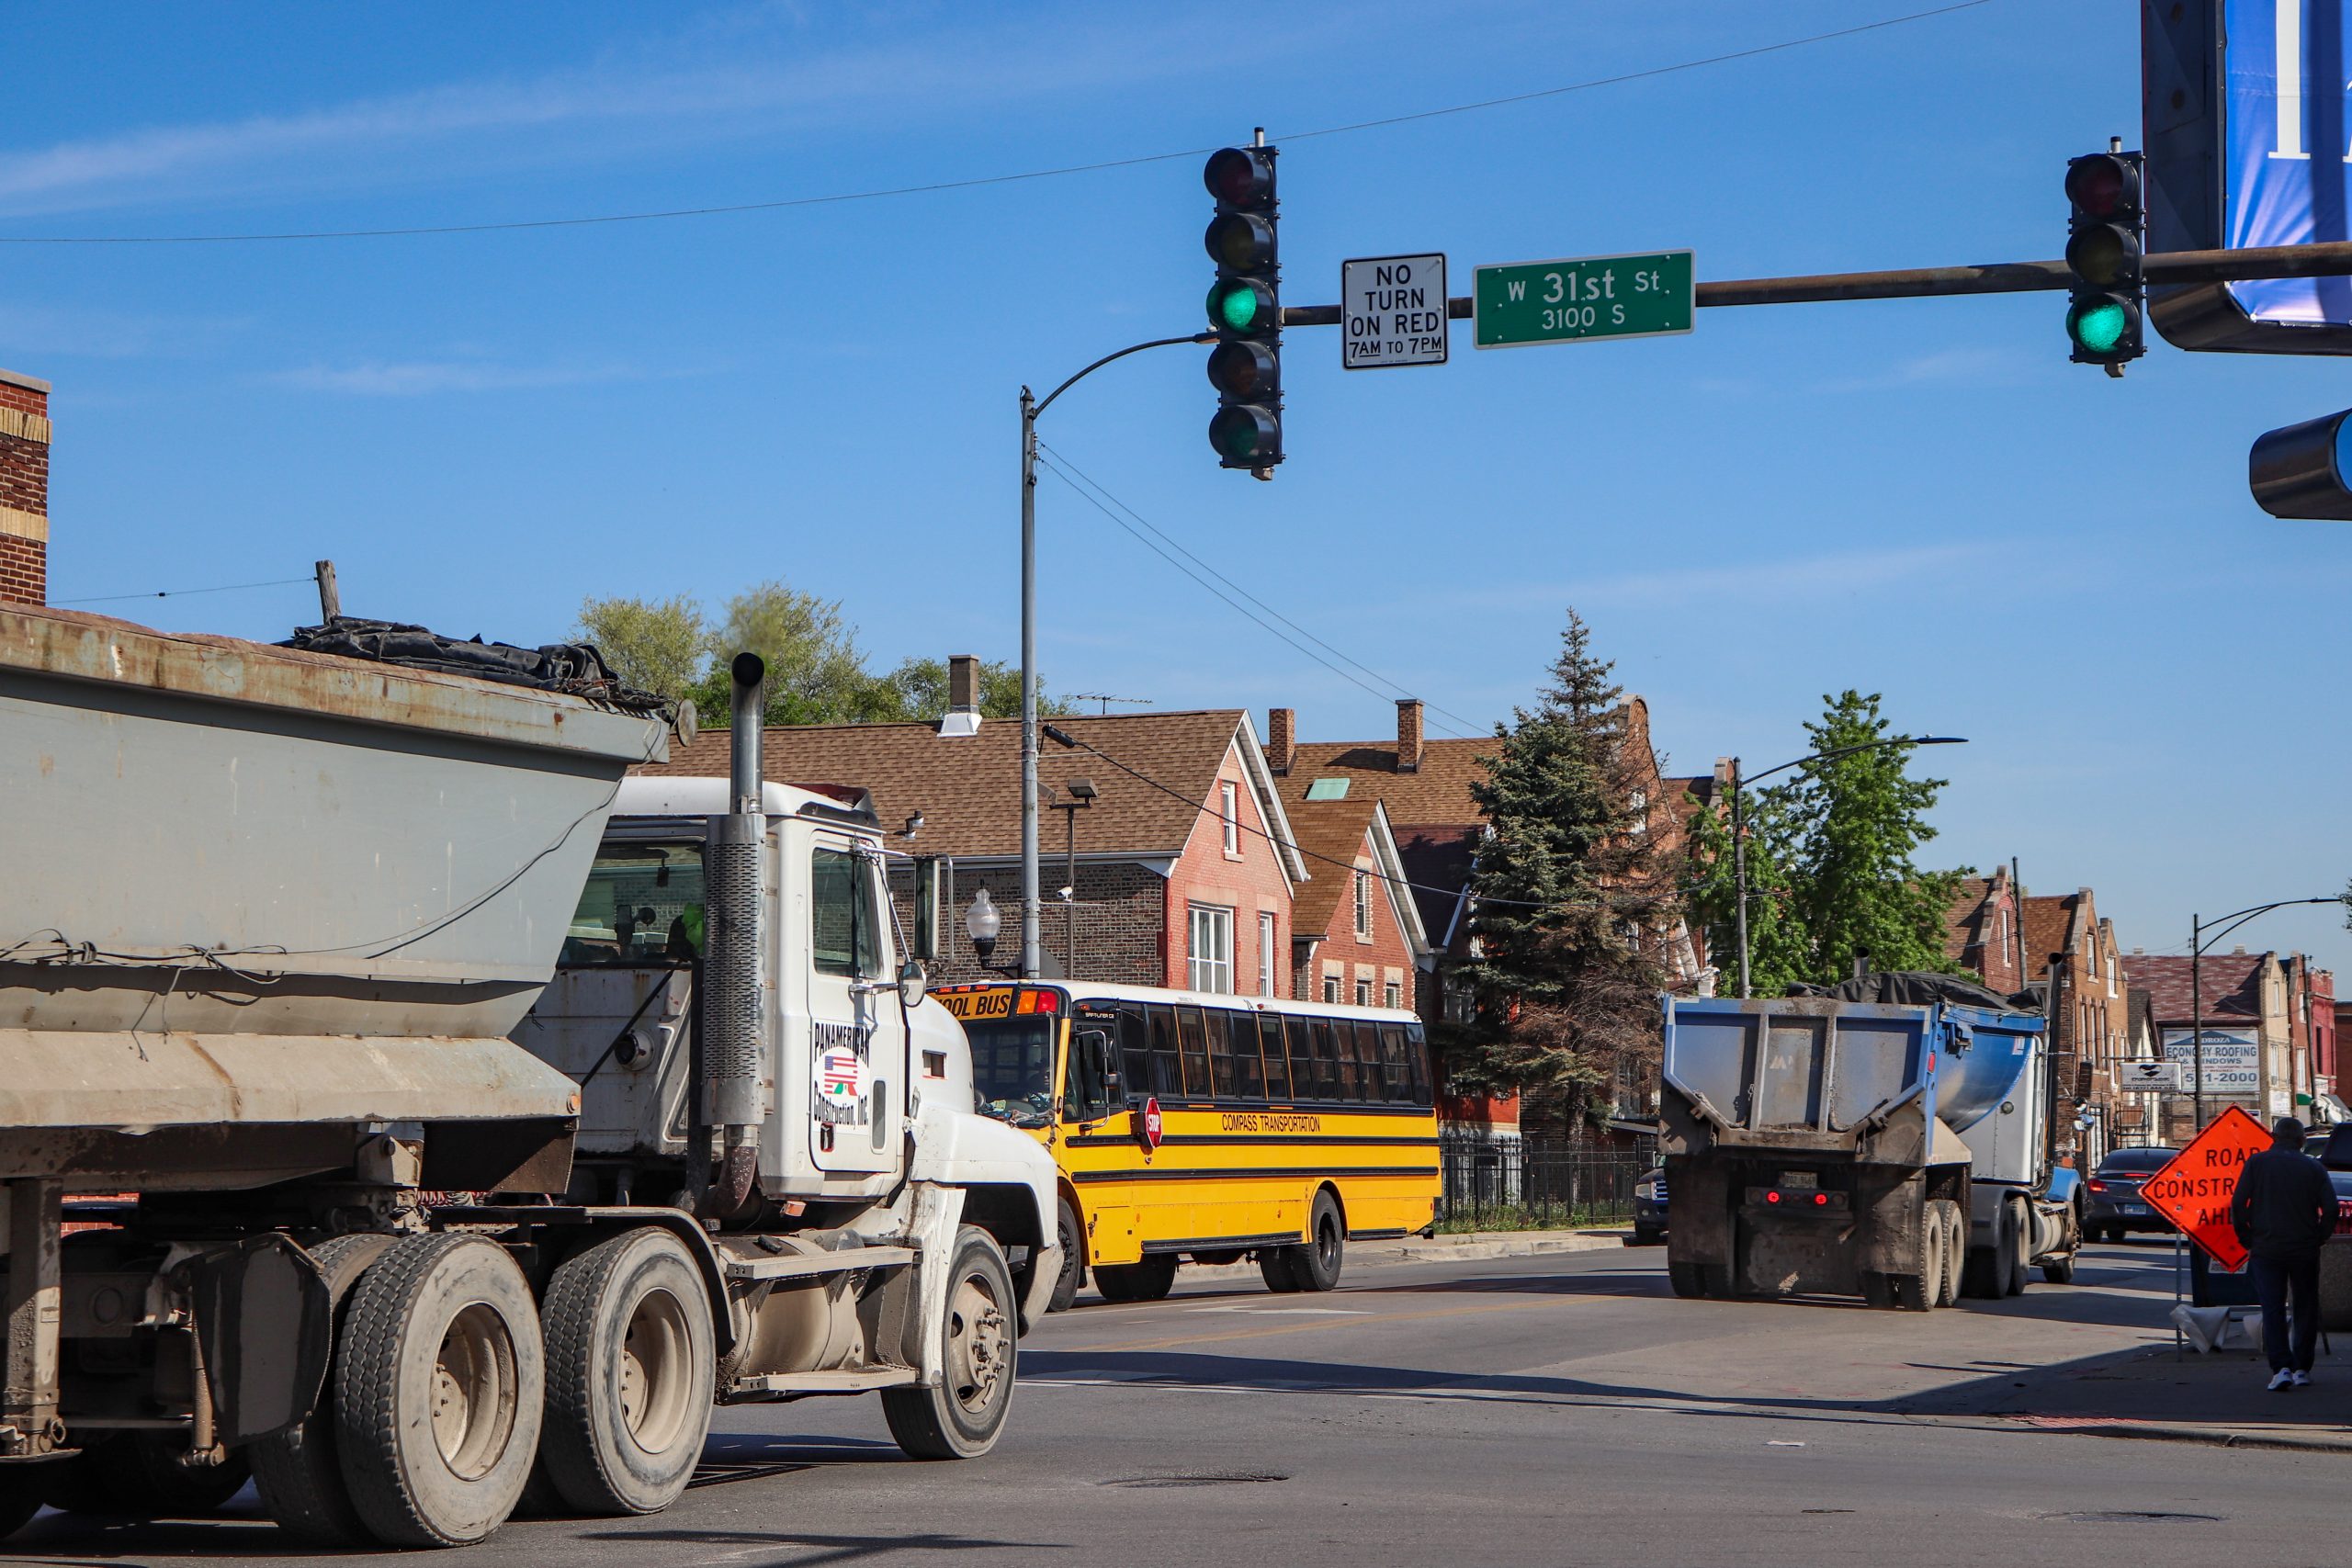 Two empty dump trucks drive northbound on Pulaski while a school bus drives south. A pedestrian can be seen walking south on Pulaski Rd. The 31st St. street sign is visible.